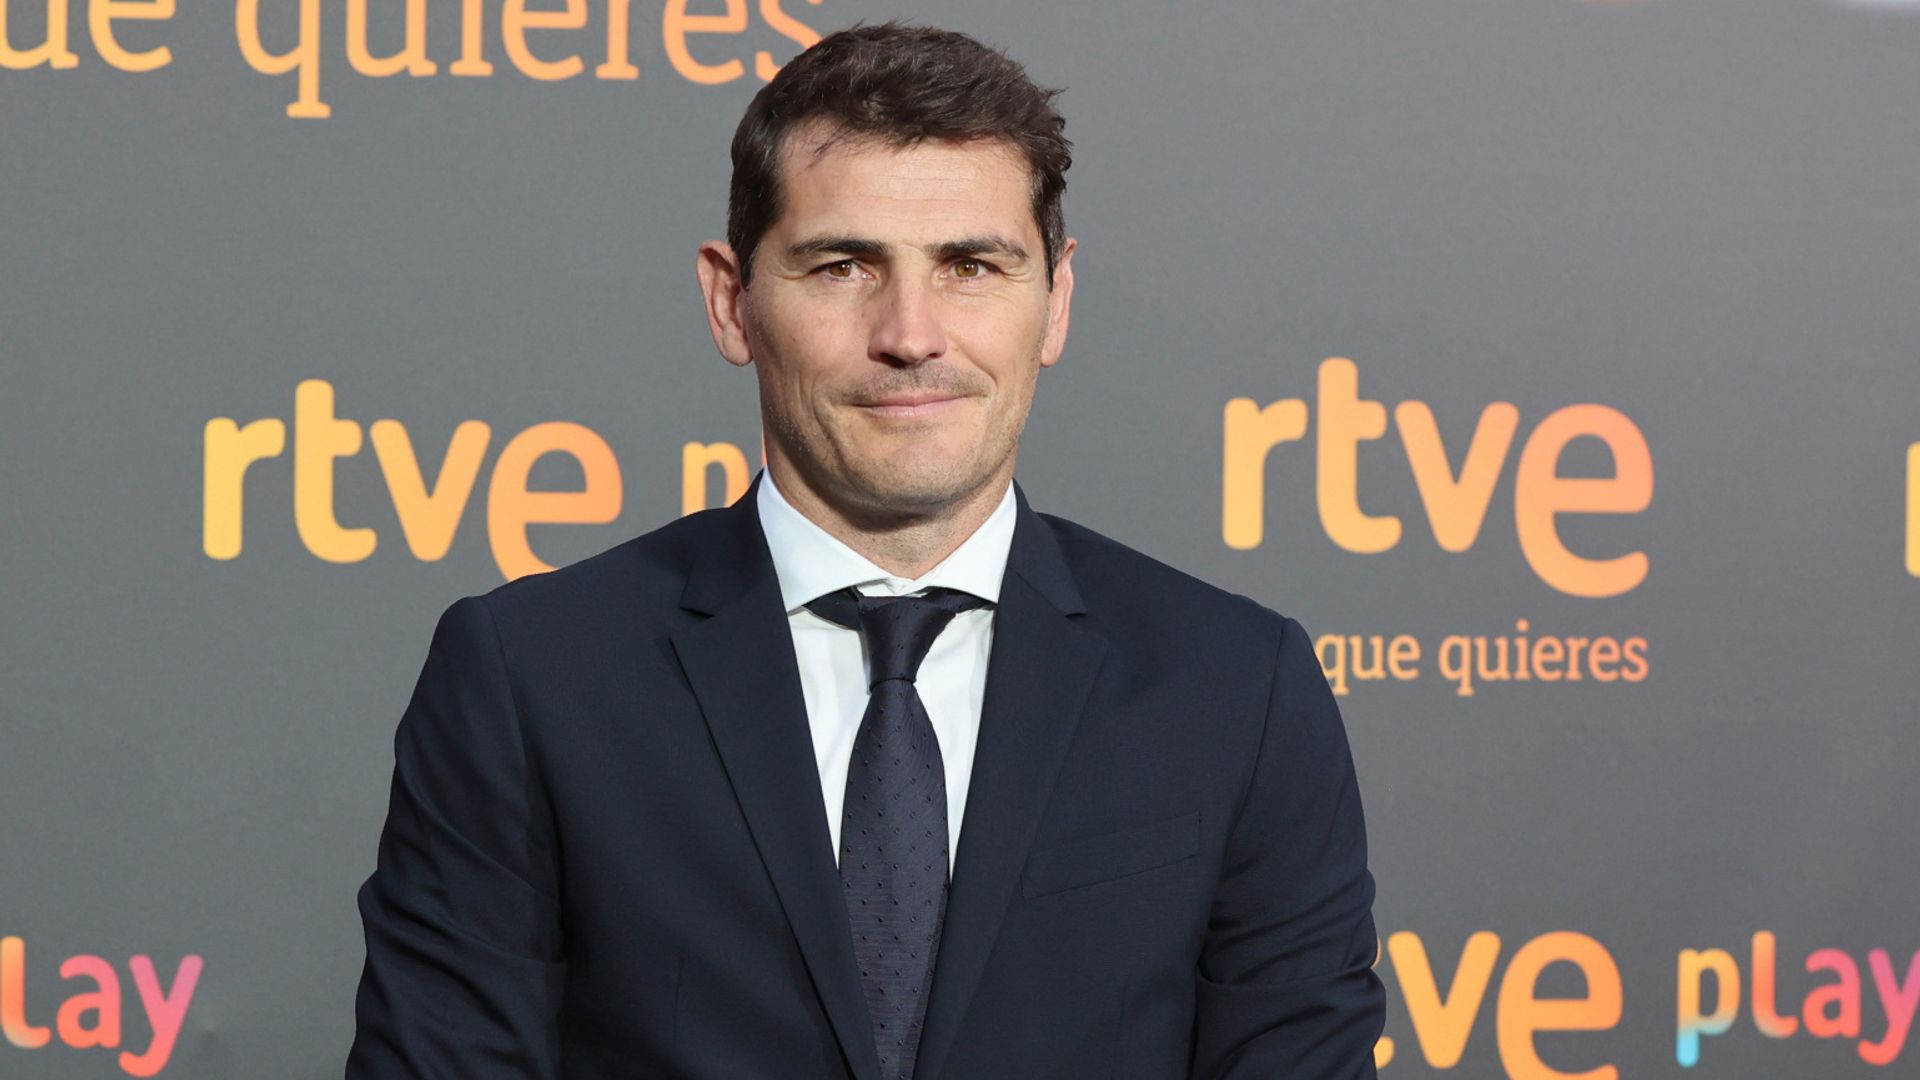 Casillas says he was hacked after 'I'm gay' tweet | Puyol apologises for 'joke'